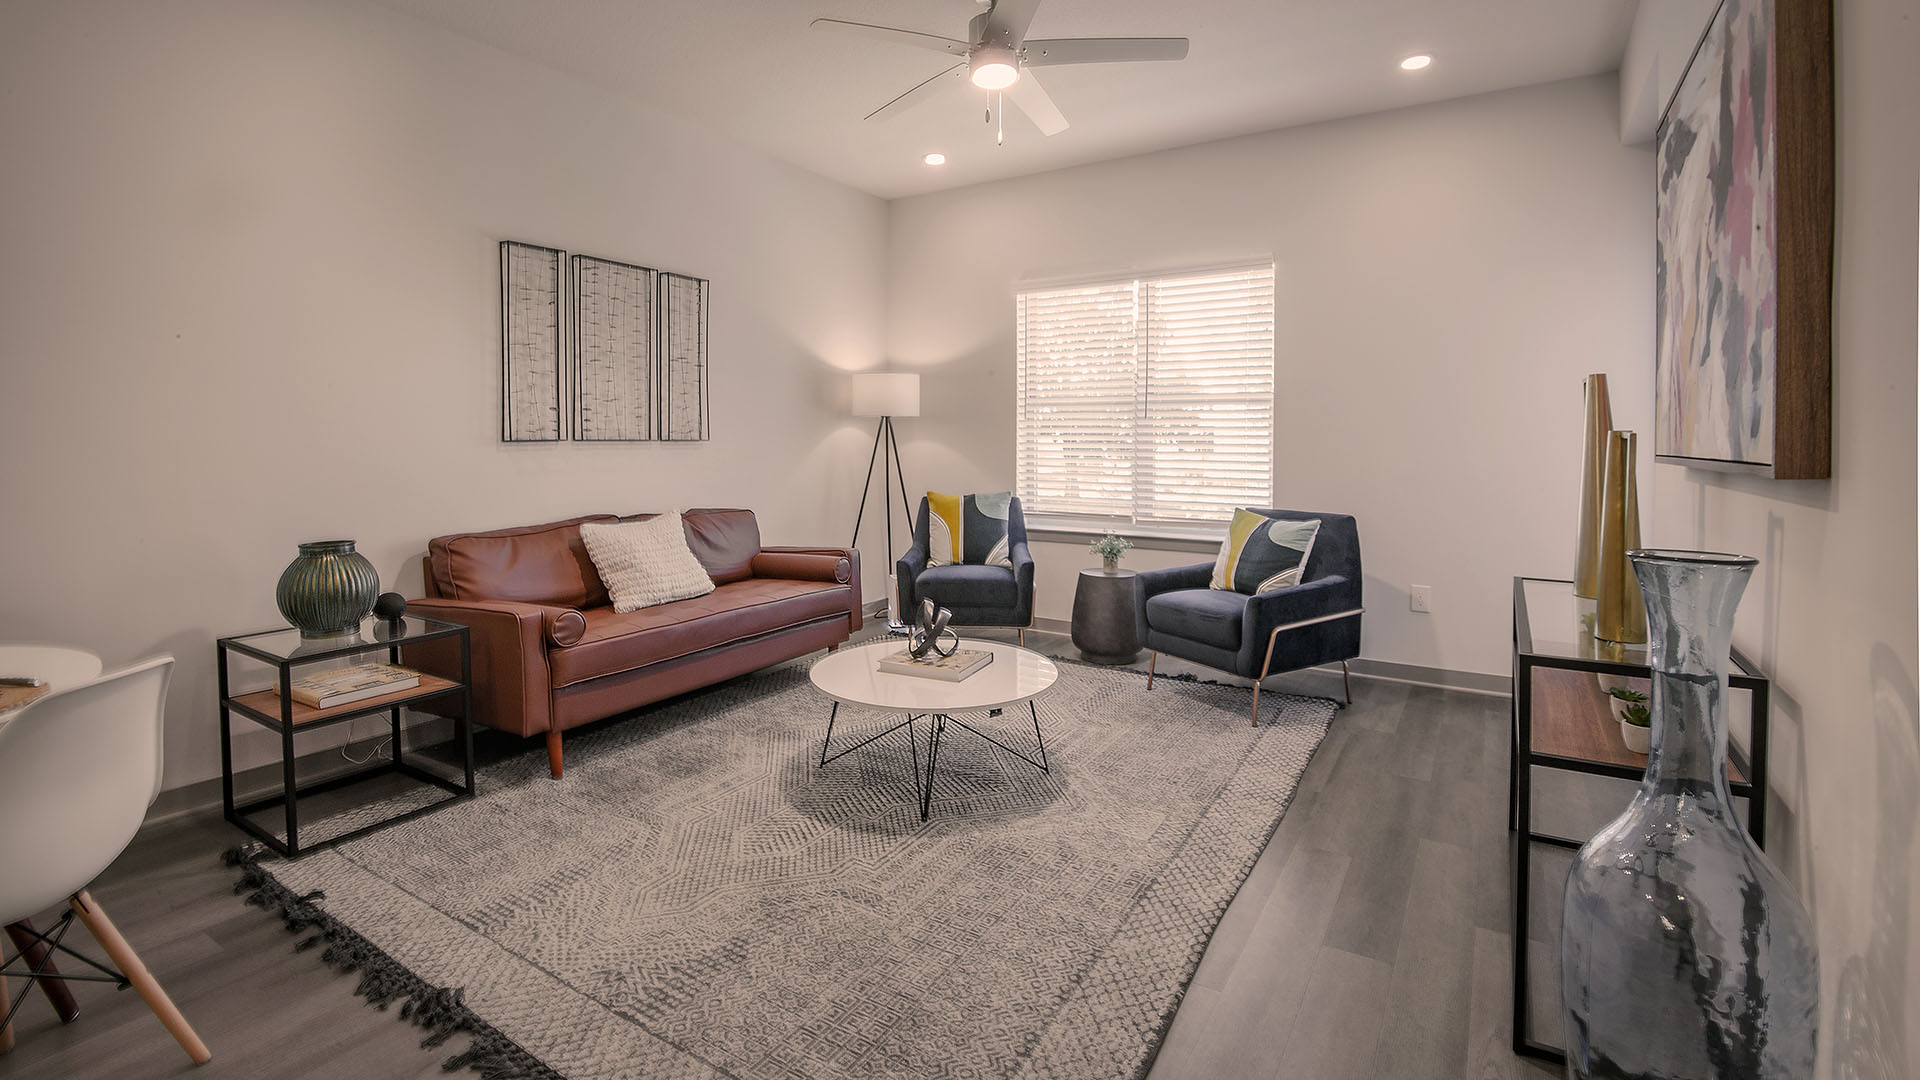 apartments in birmingham for rent - Axel Row Apartments - Modern livingroom featuring brown leather sofa, blue suede chairs, circular coffee table, white walls accented with artwork, ceiling fan with lights, and large window with shades